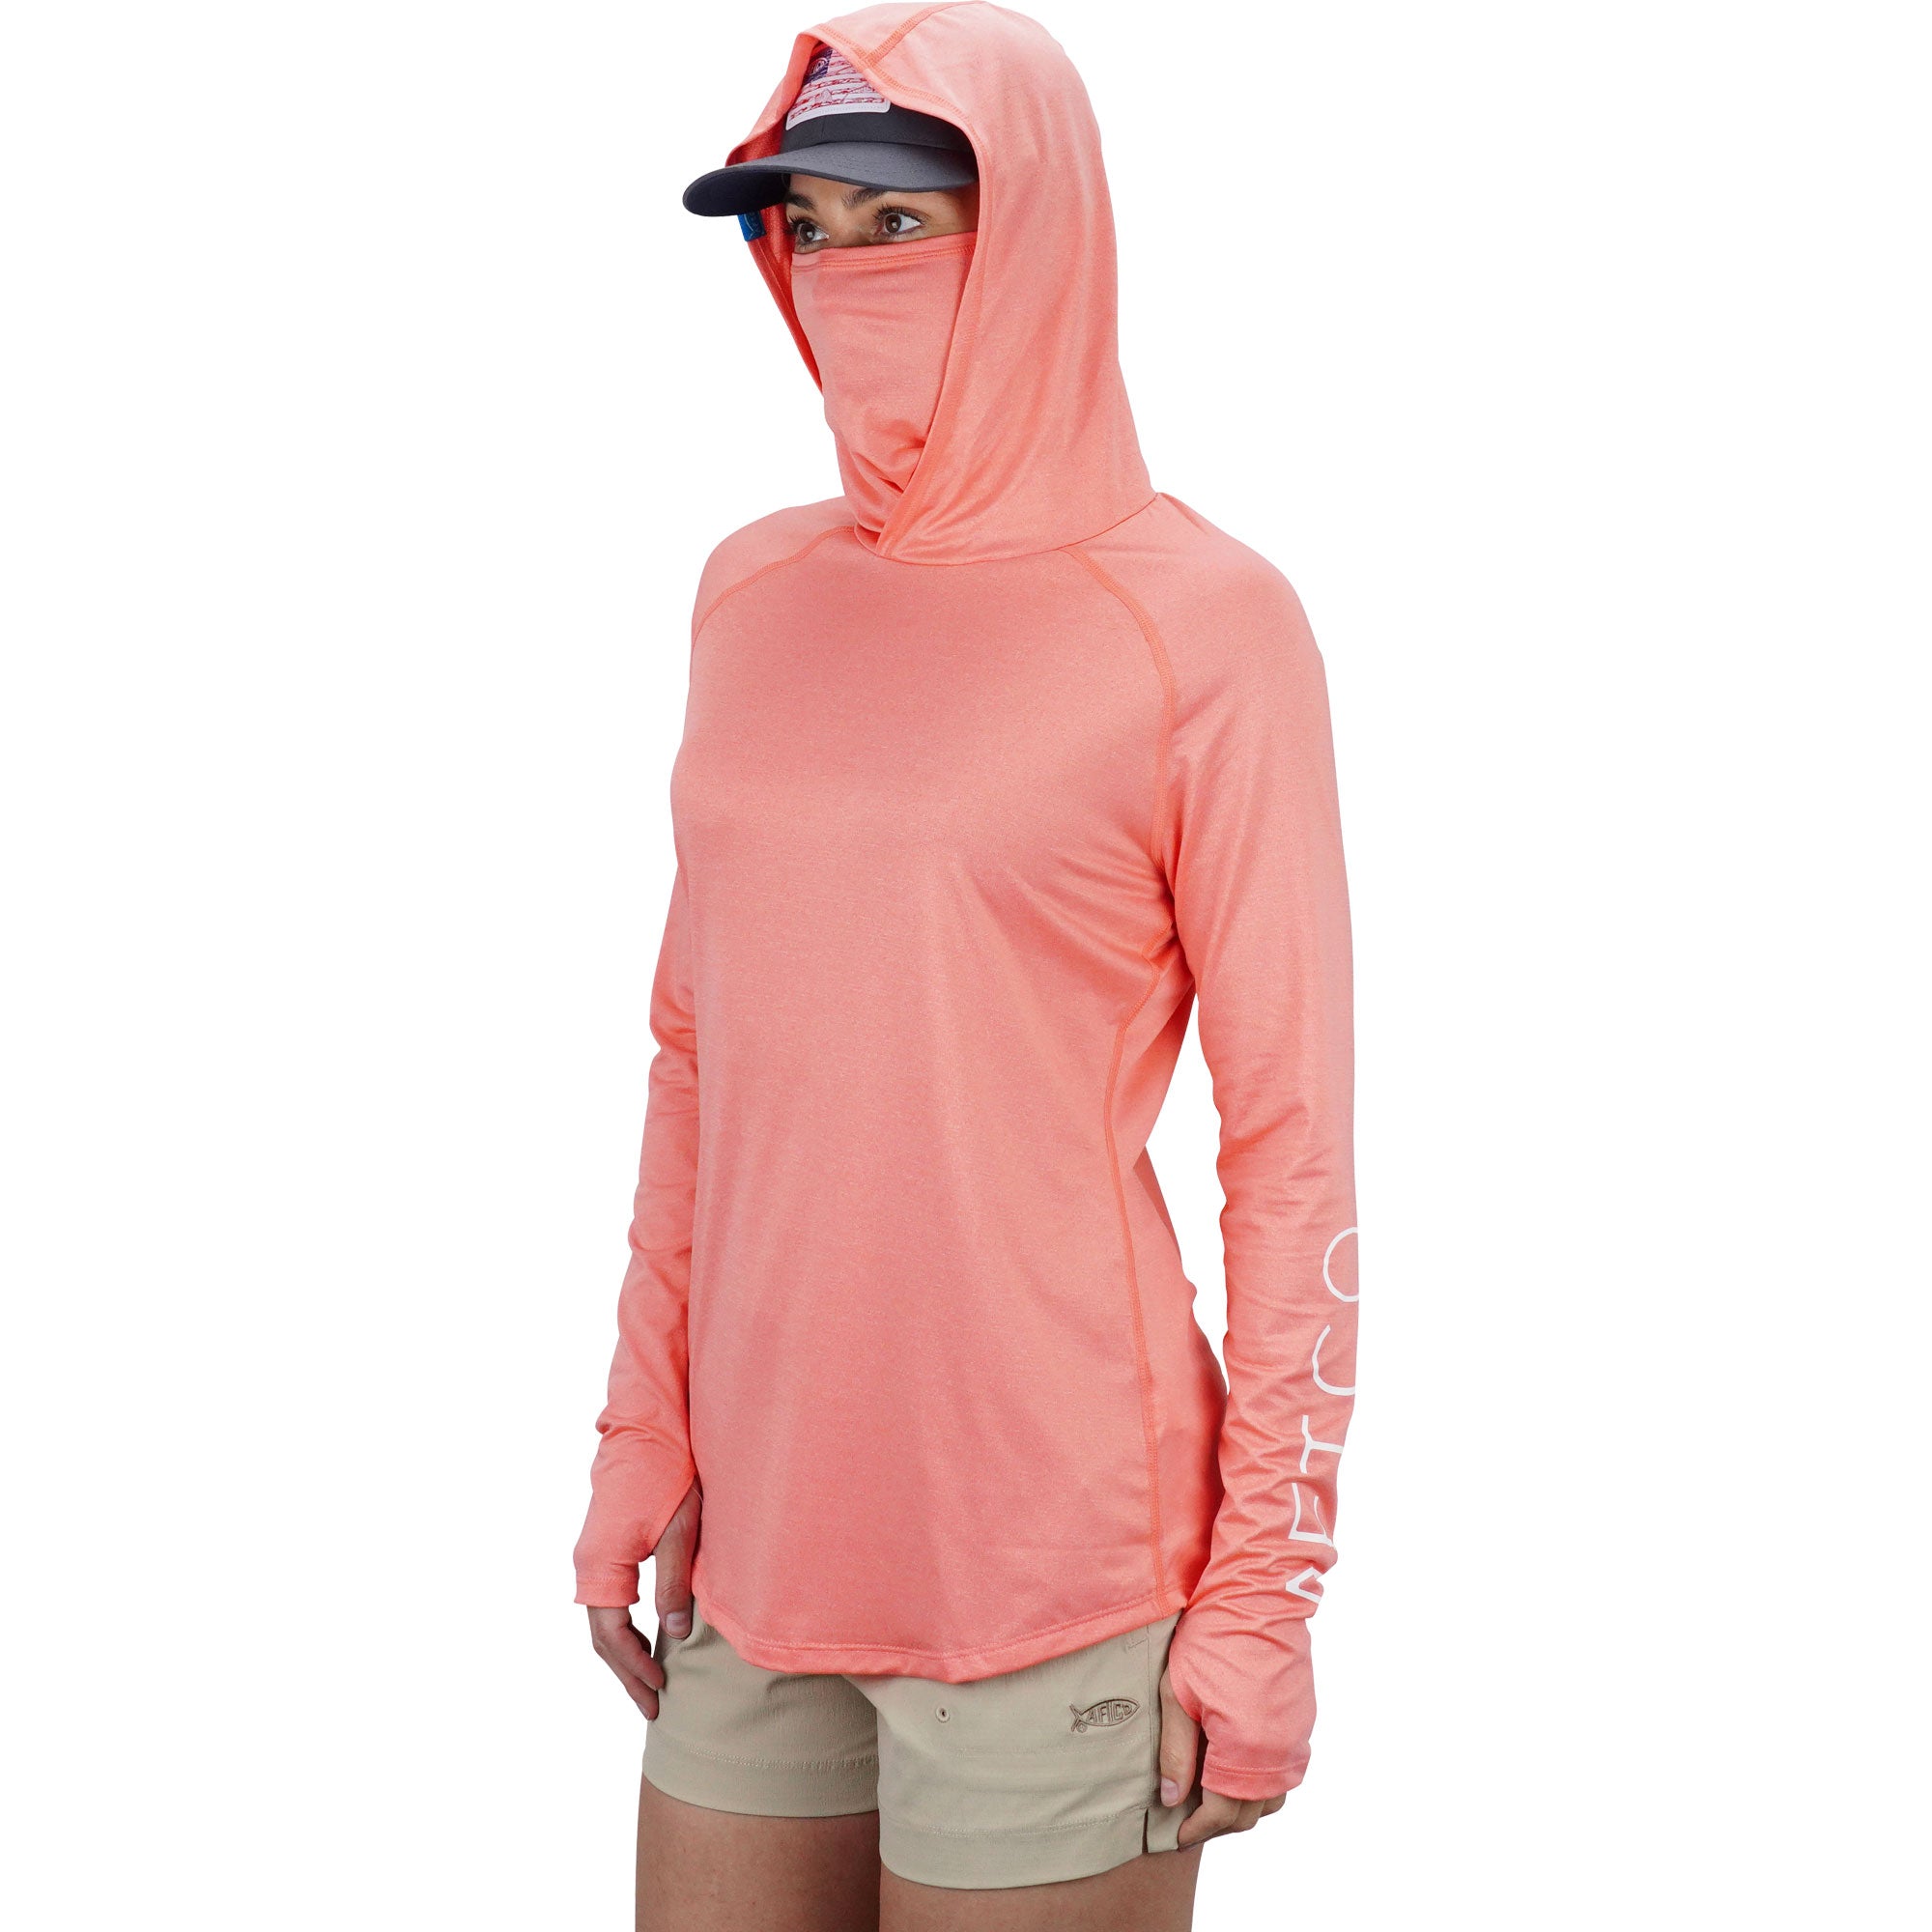 AFTCO - Women's Yurei Hooded Performance Shirt Coral Heather / Small